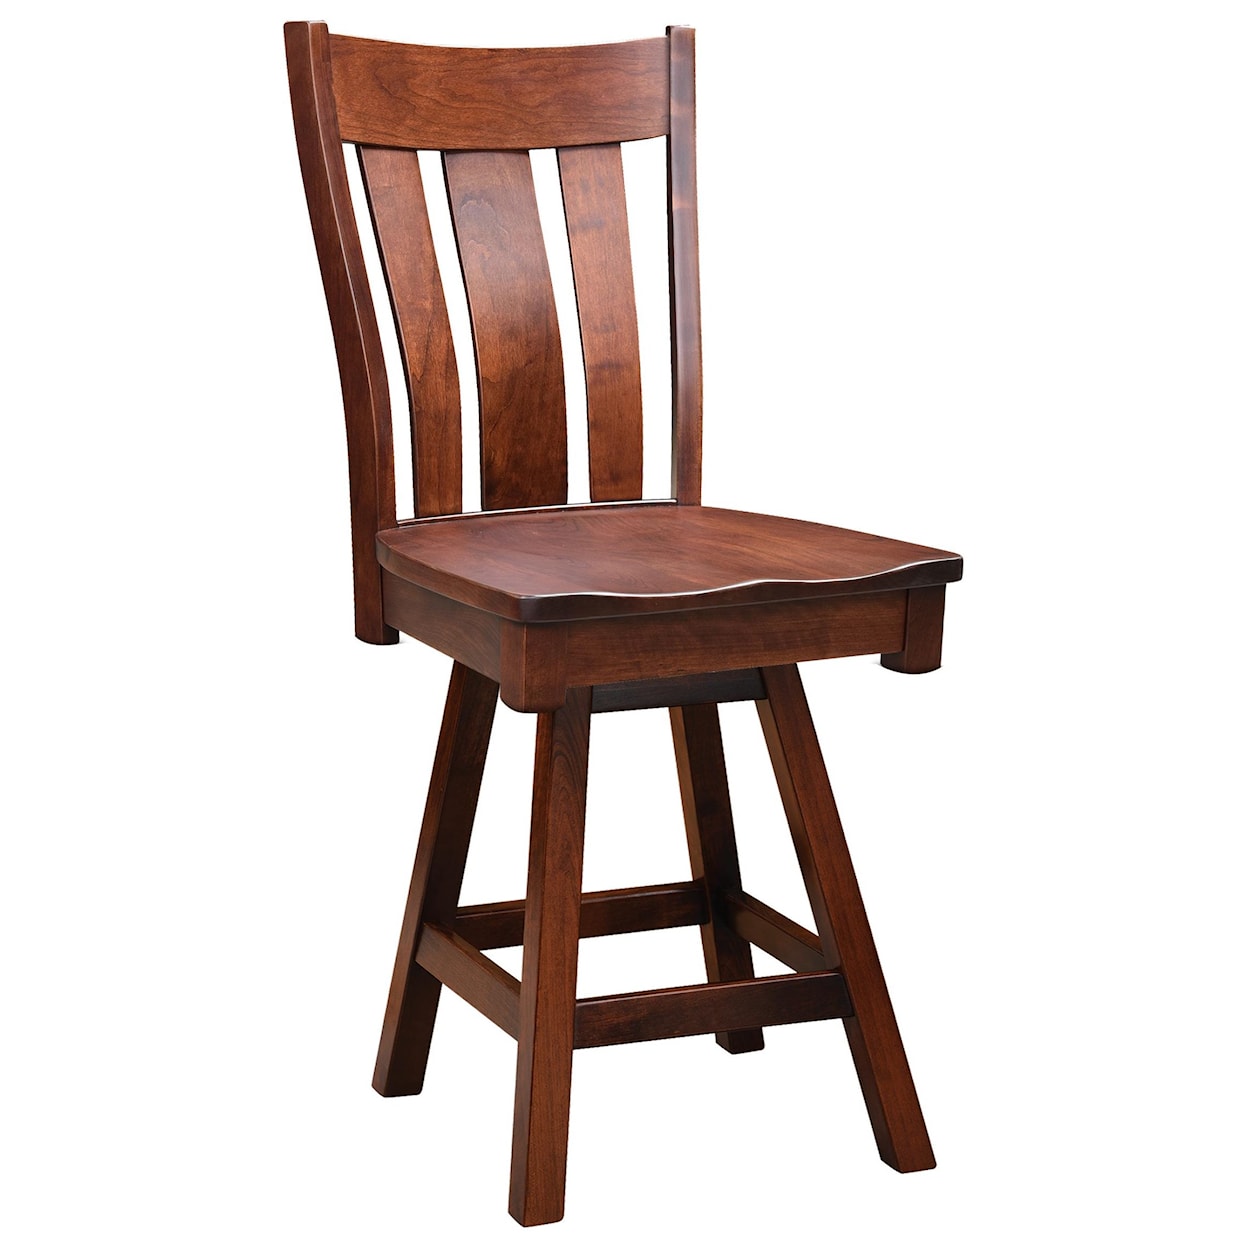 Wengerd Wood Products Bayberry 24" Swivel Stool